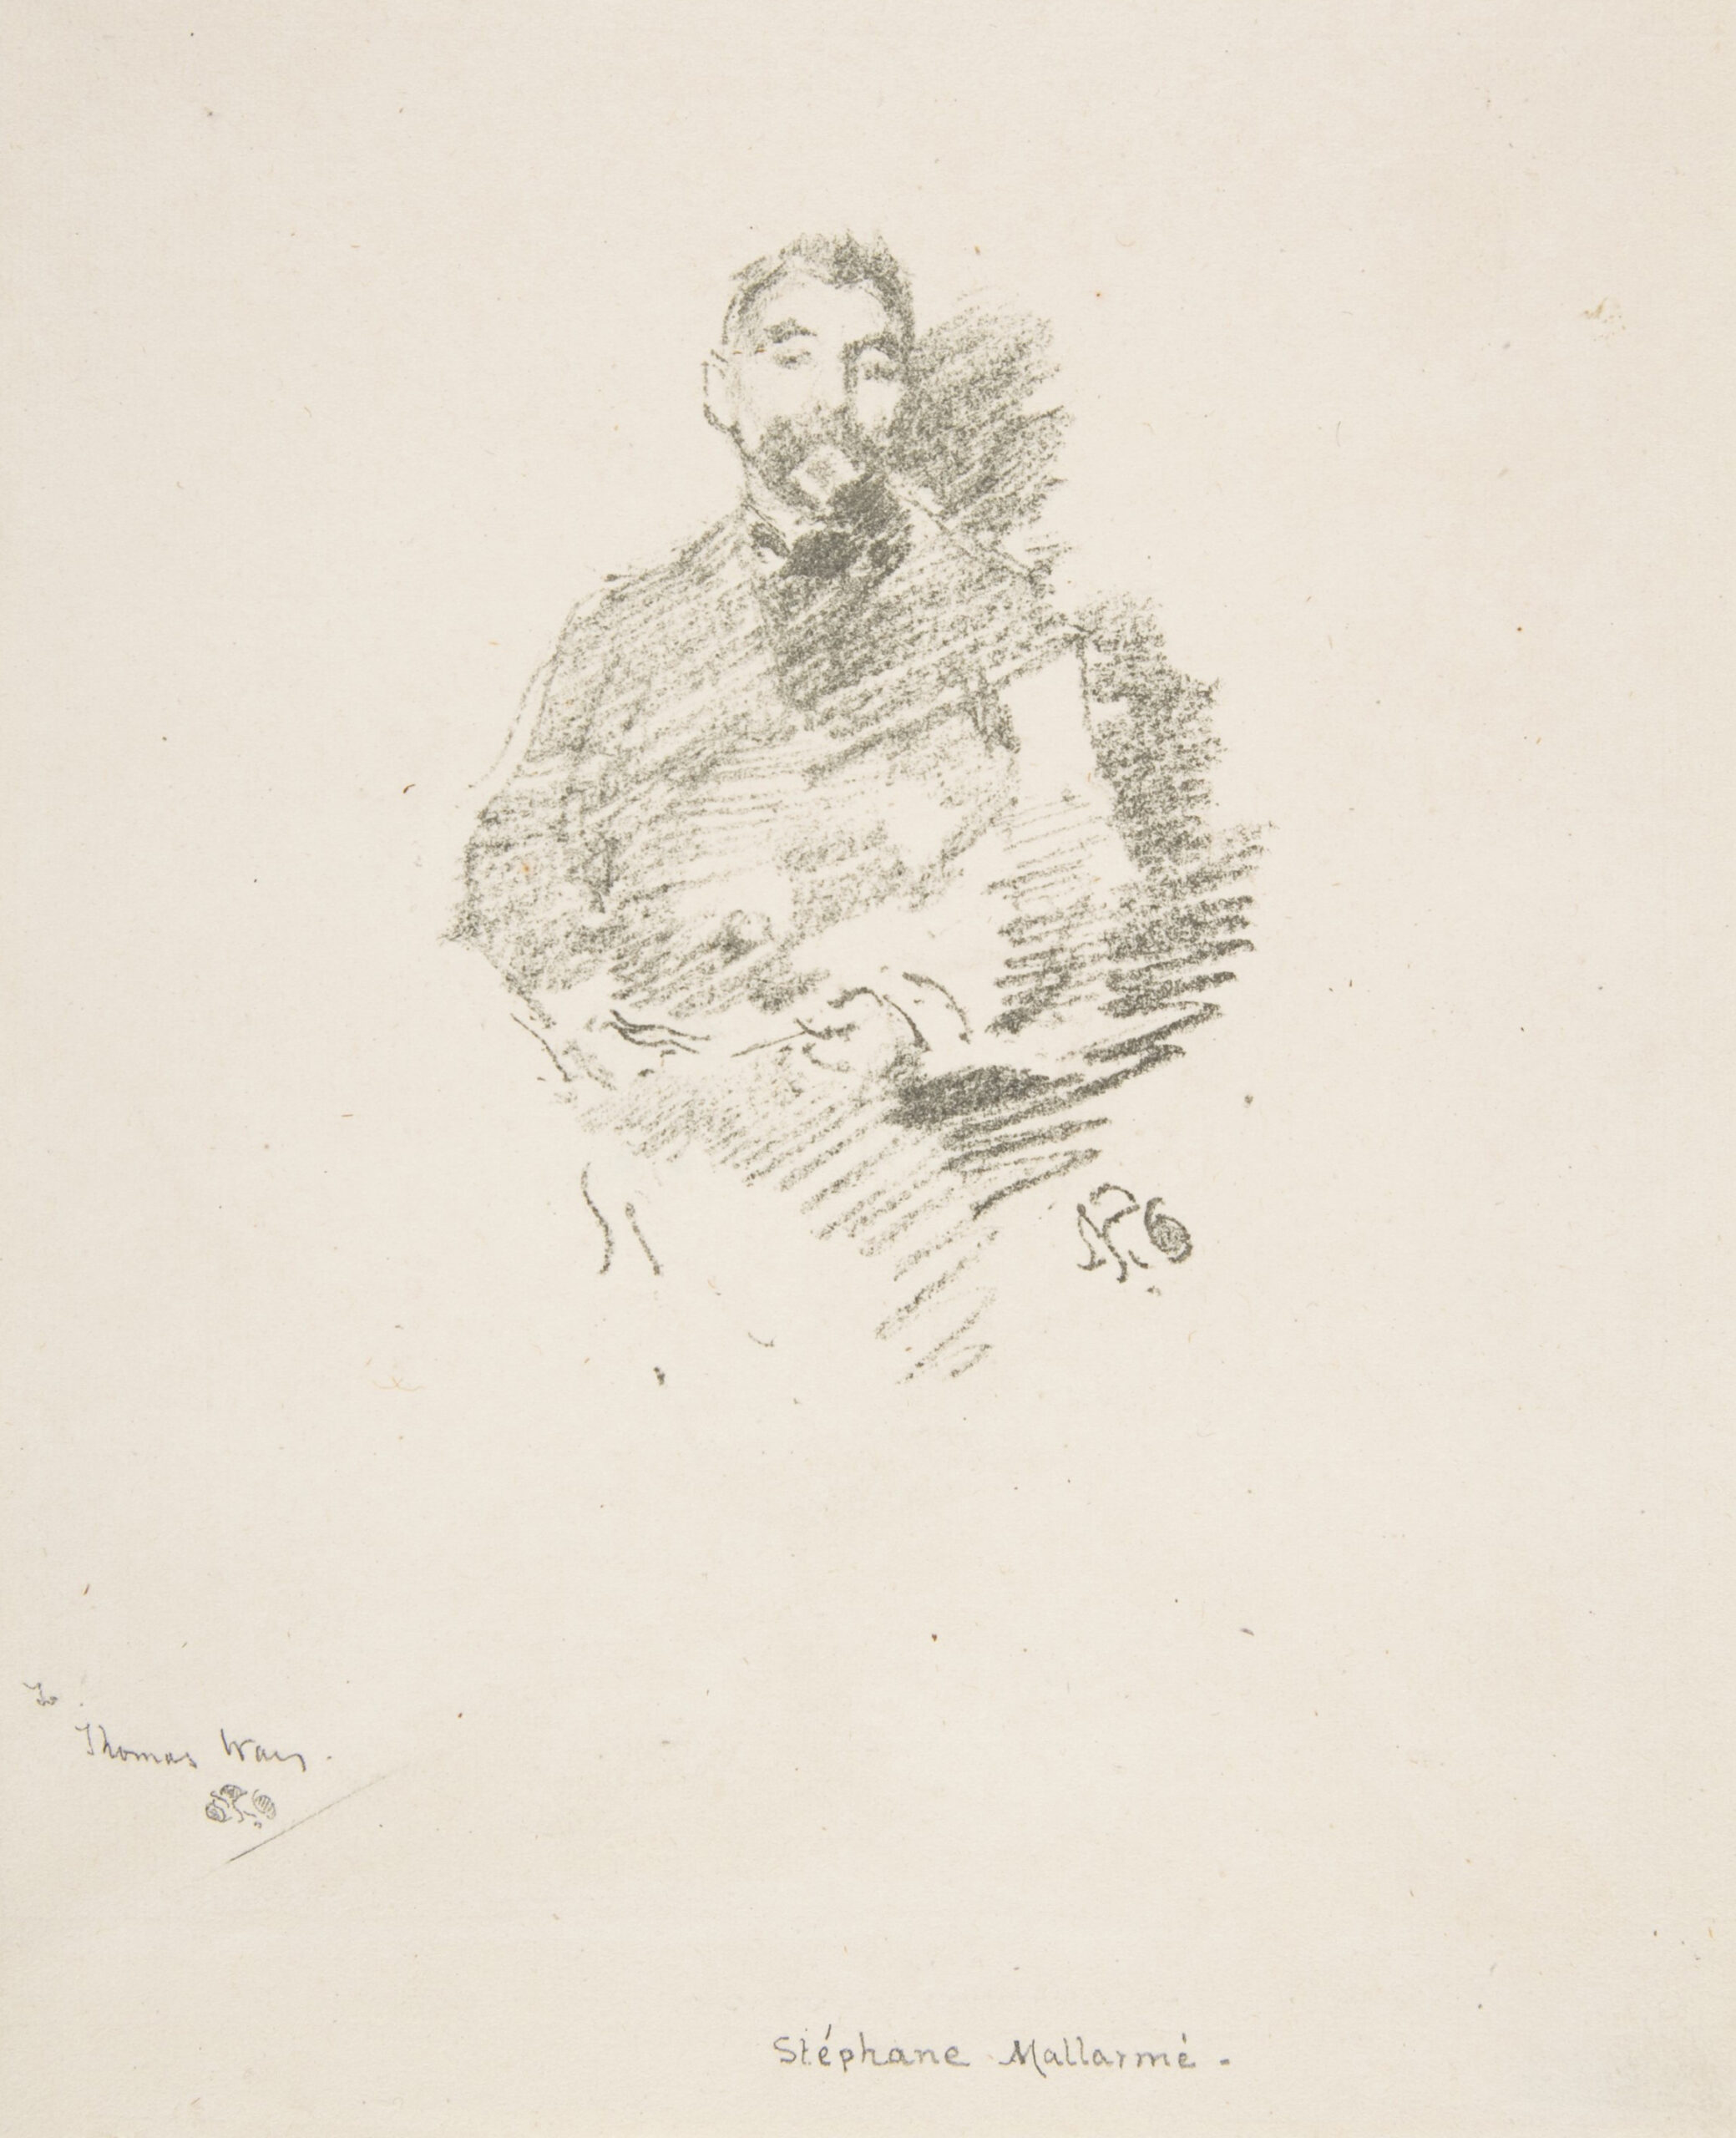 The lithographic portrait renders the head and torso of a middle-aged Stéphane Mallarmé in soft and impressionistic lines. Facing the viewer, Mallarmé is seated, holding a piece of paper on his lap. He is wearing a jacket and loose dark tie and has a moustache and short beard.